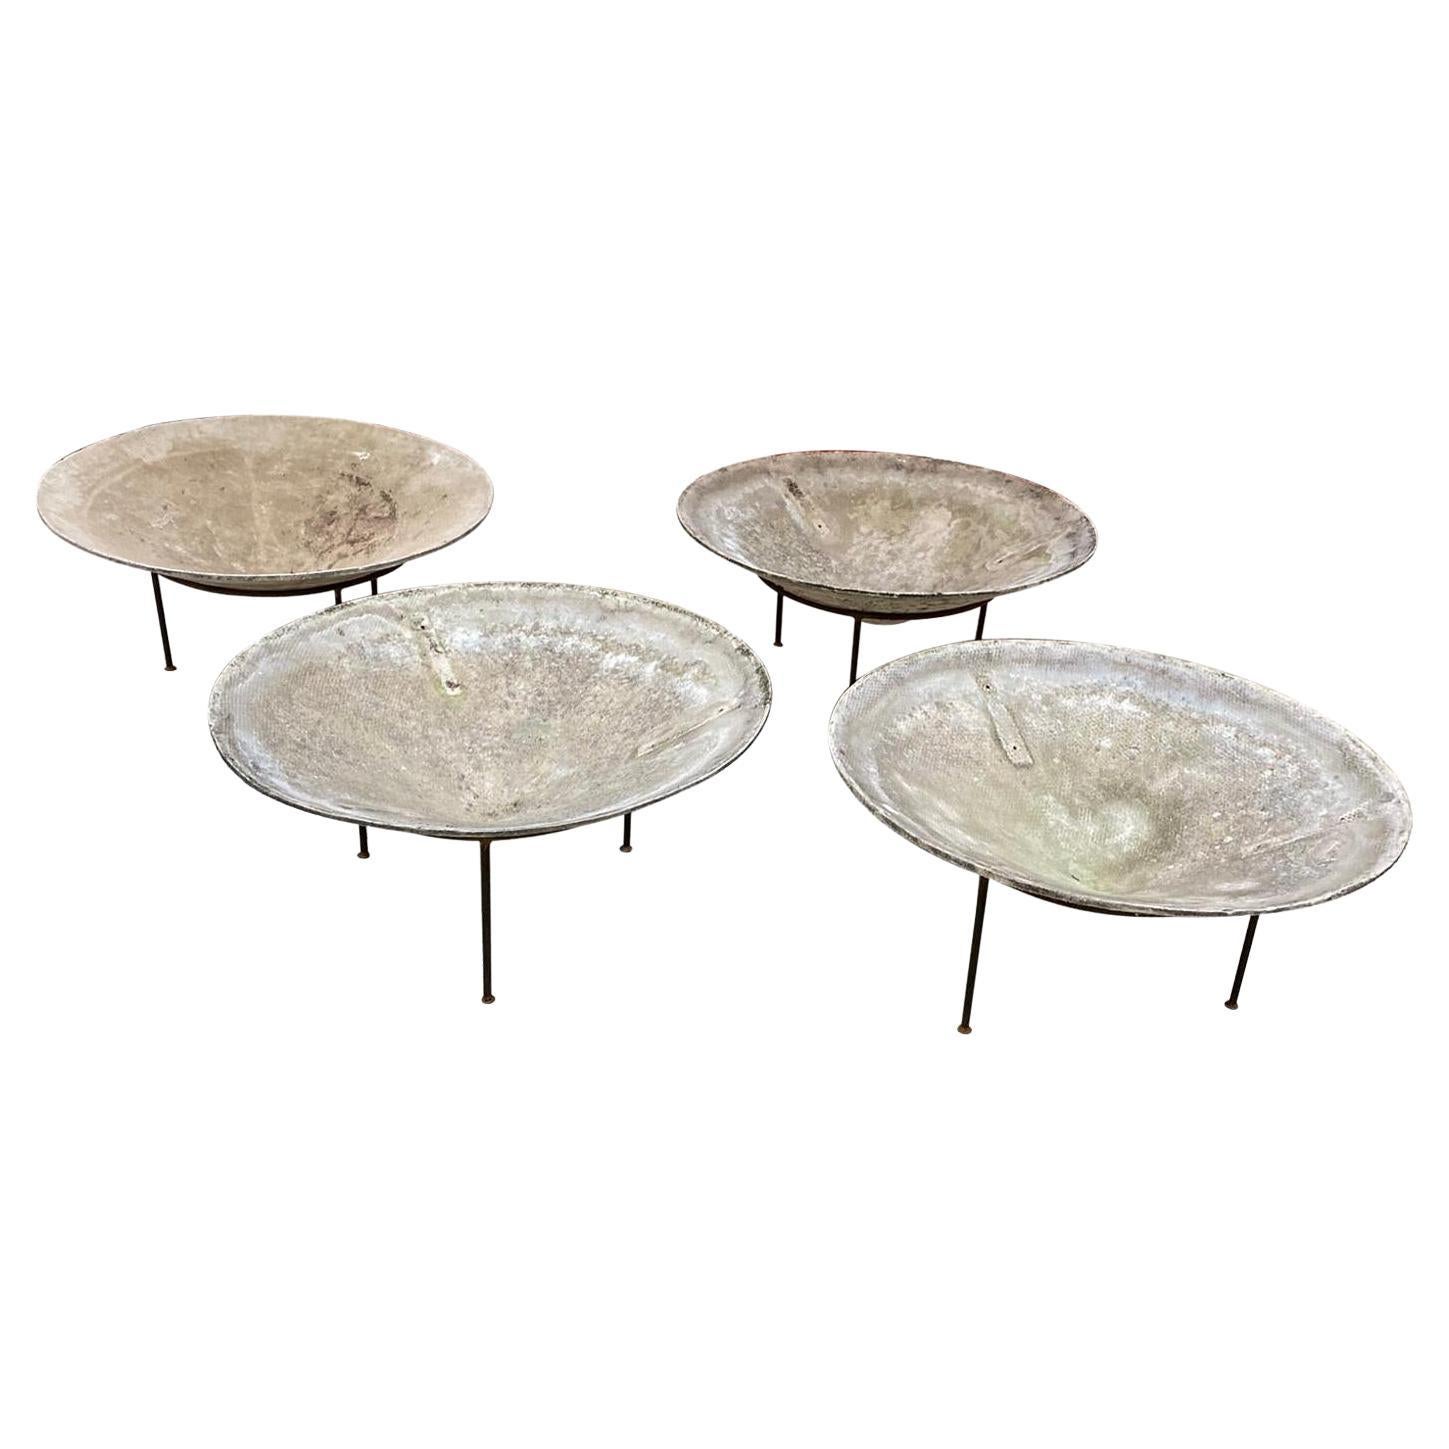 3 Large Eternit Saucer Planters Designed by Willy Guhl with Wrought Iron Base